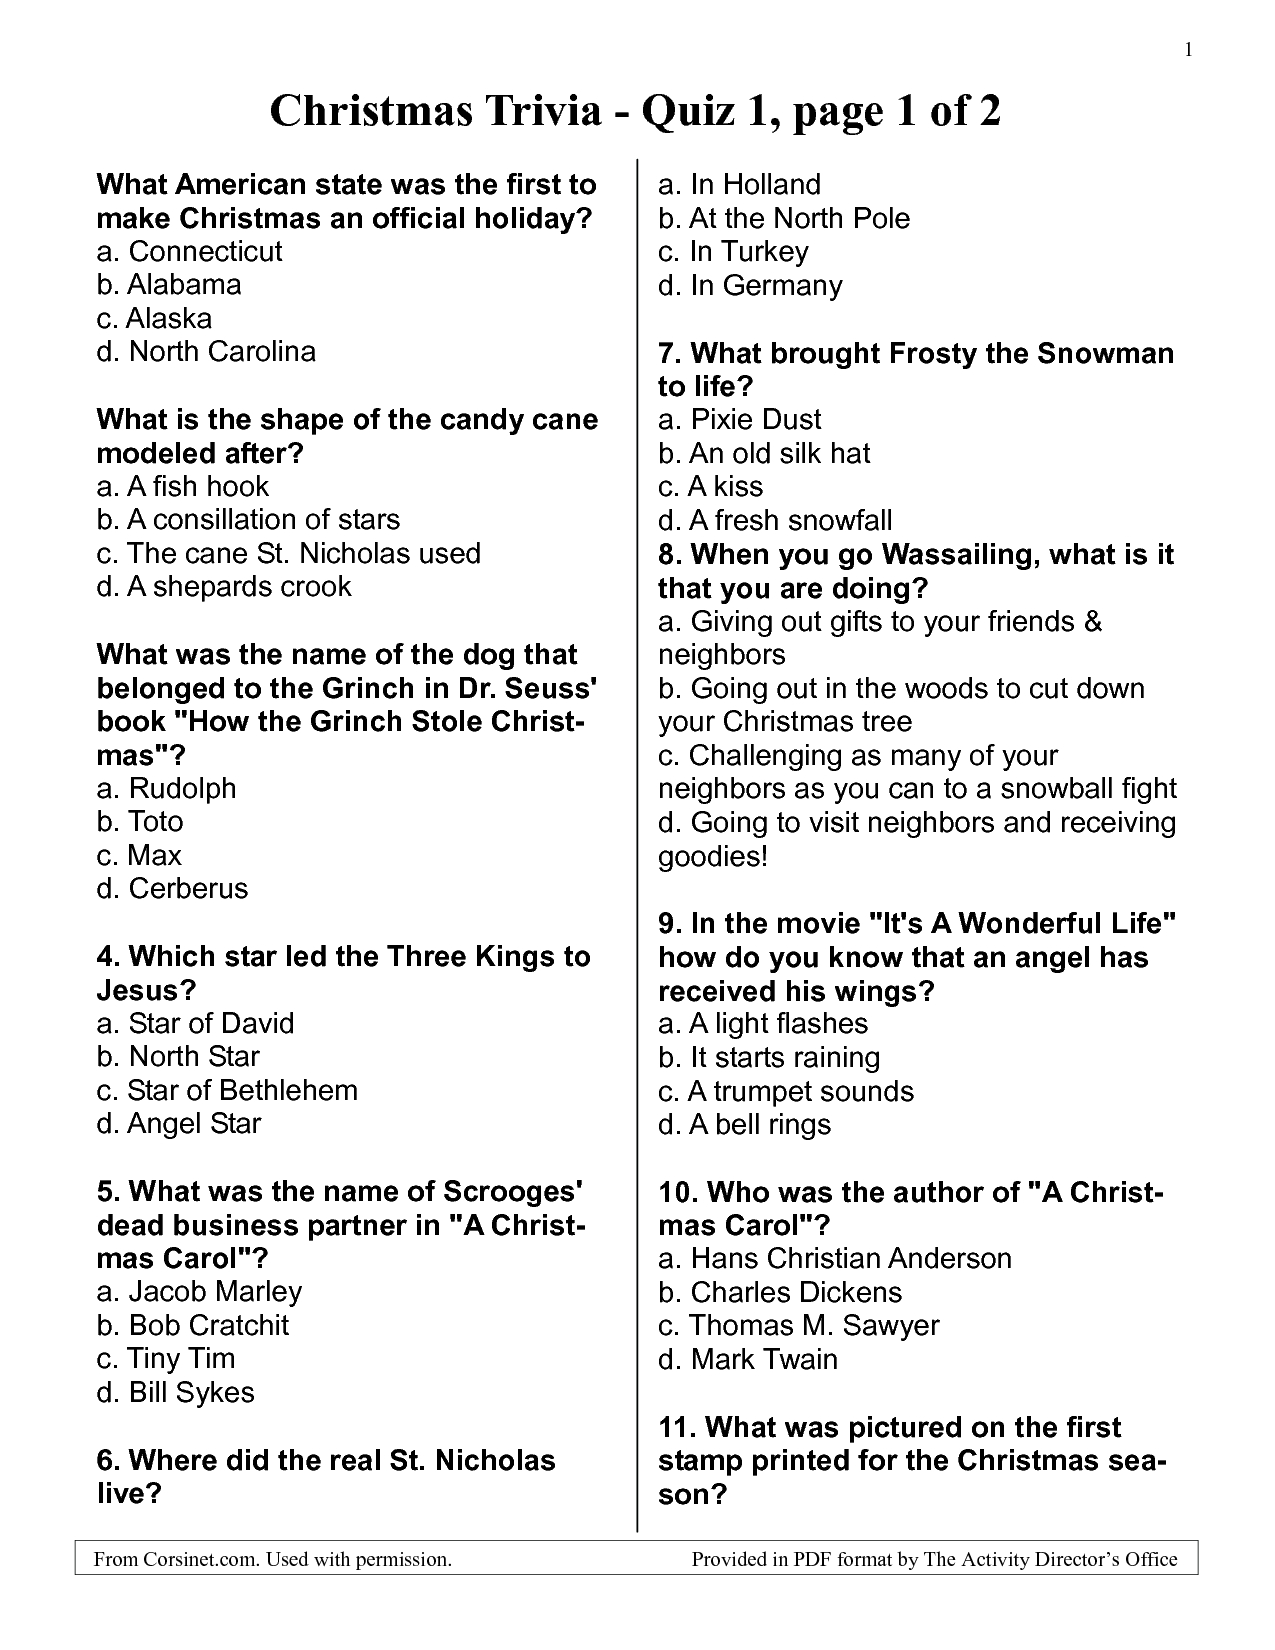 free-printable-bible-trivia-questions-and-answers-free-printable-a-to-z